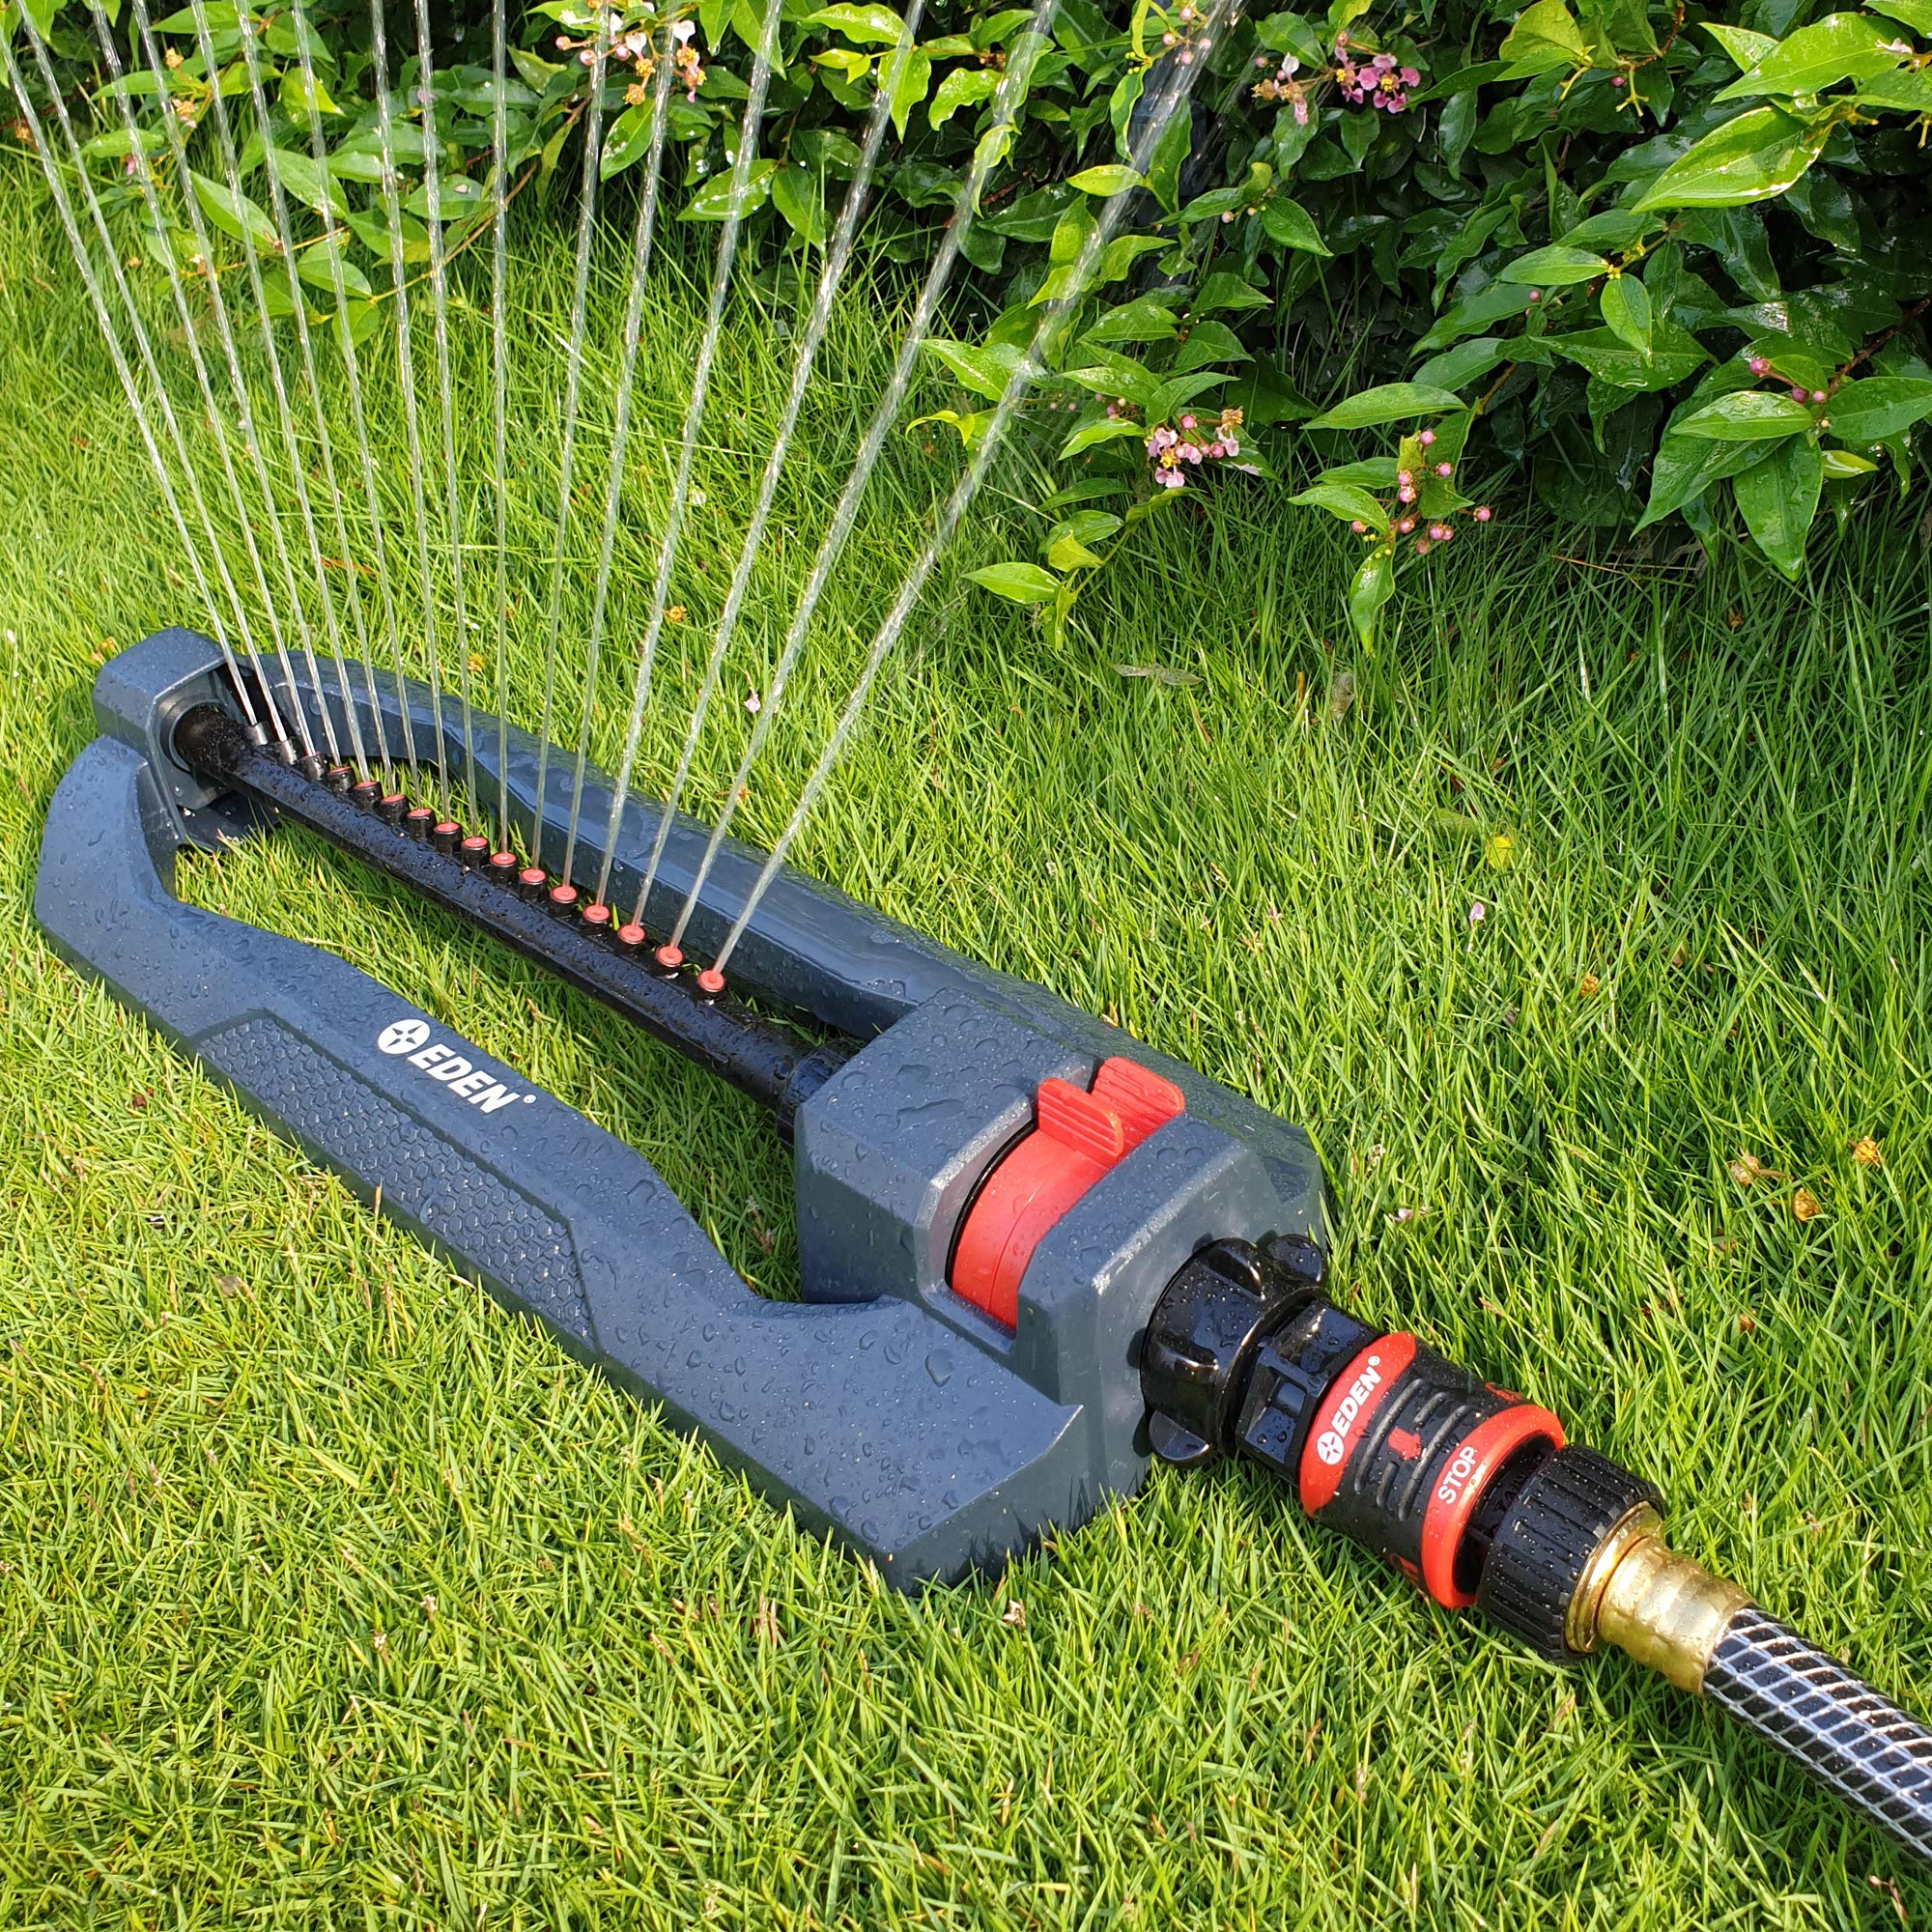 Eden 96213 Lawn & Garden Essential Oscillating Sprinkler | Water Sprinkler for Yard,Covers up to 3,600 sq. ft., Heavy Weight Base